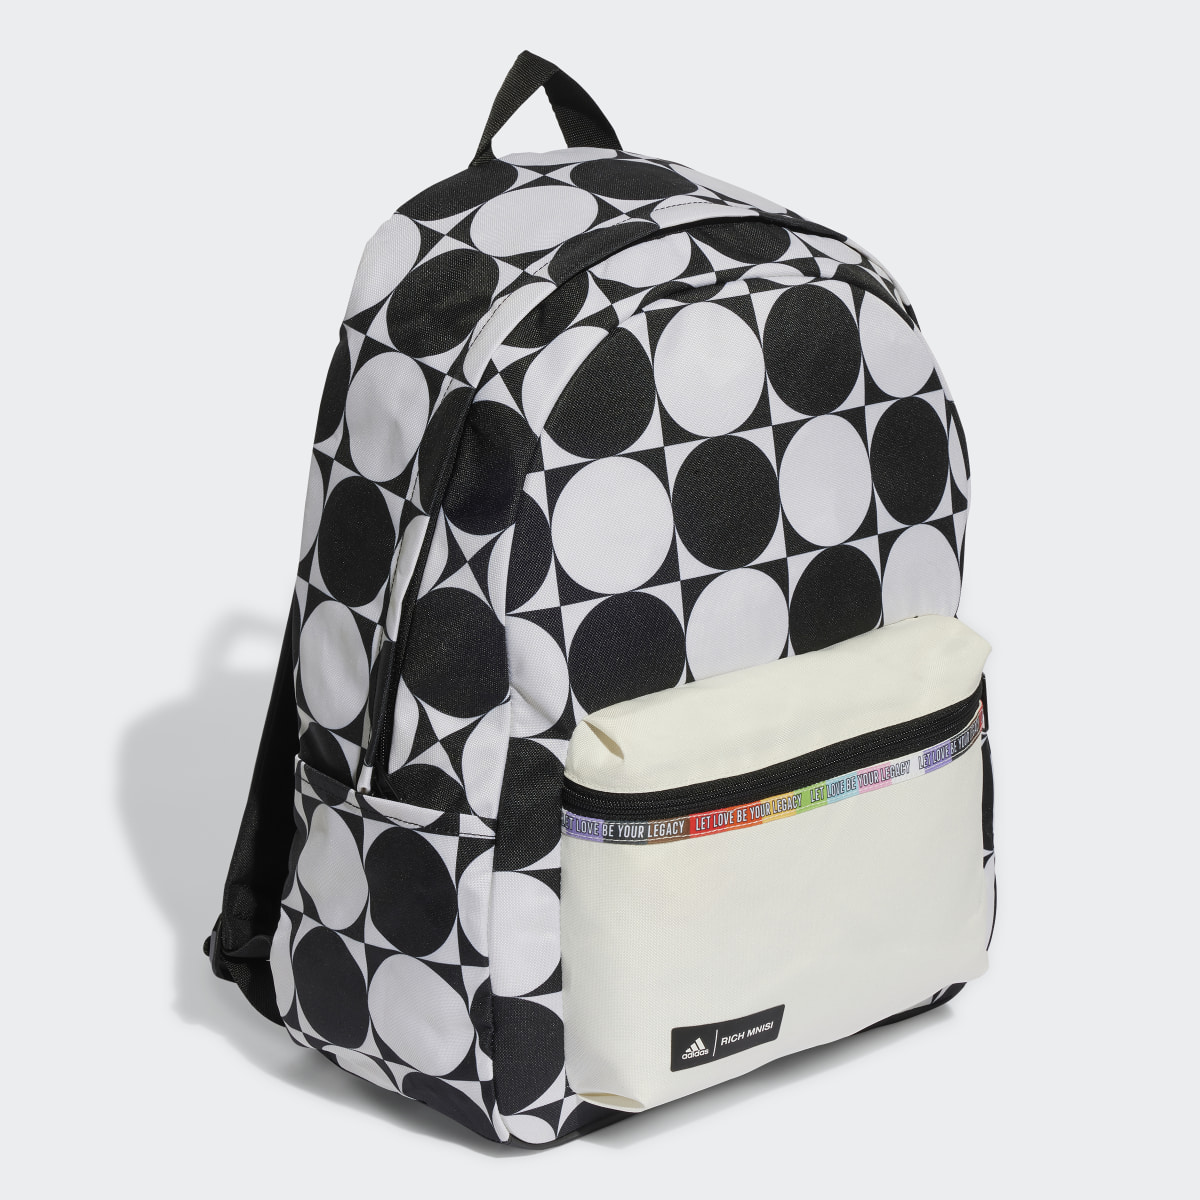 Adidas Classic Pride Backpack. 4